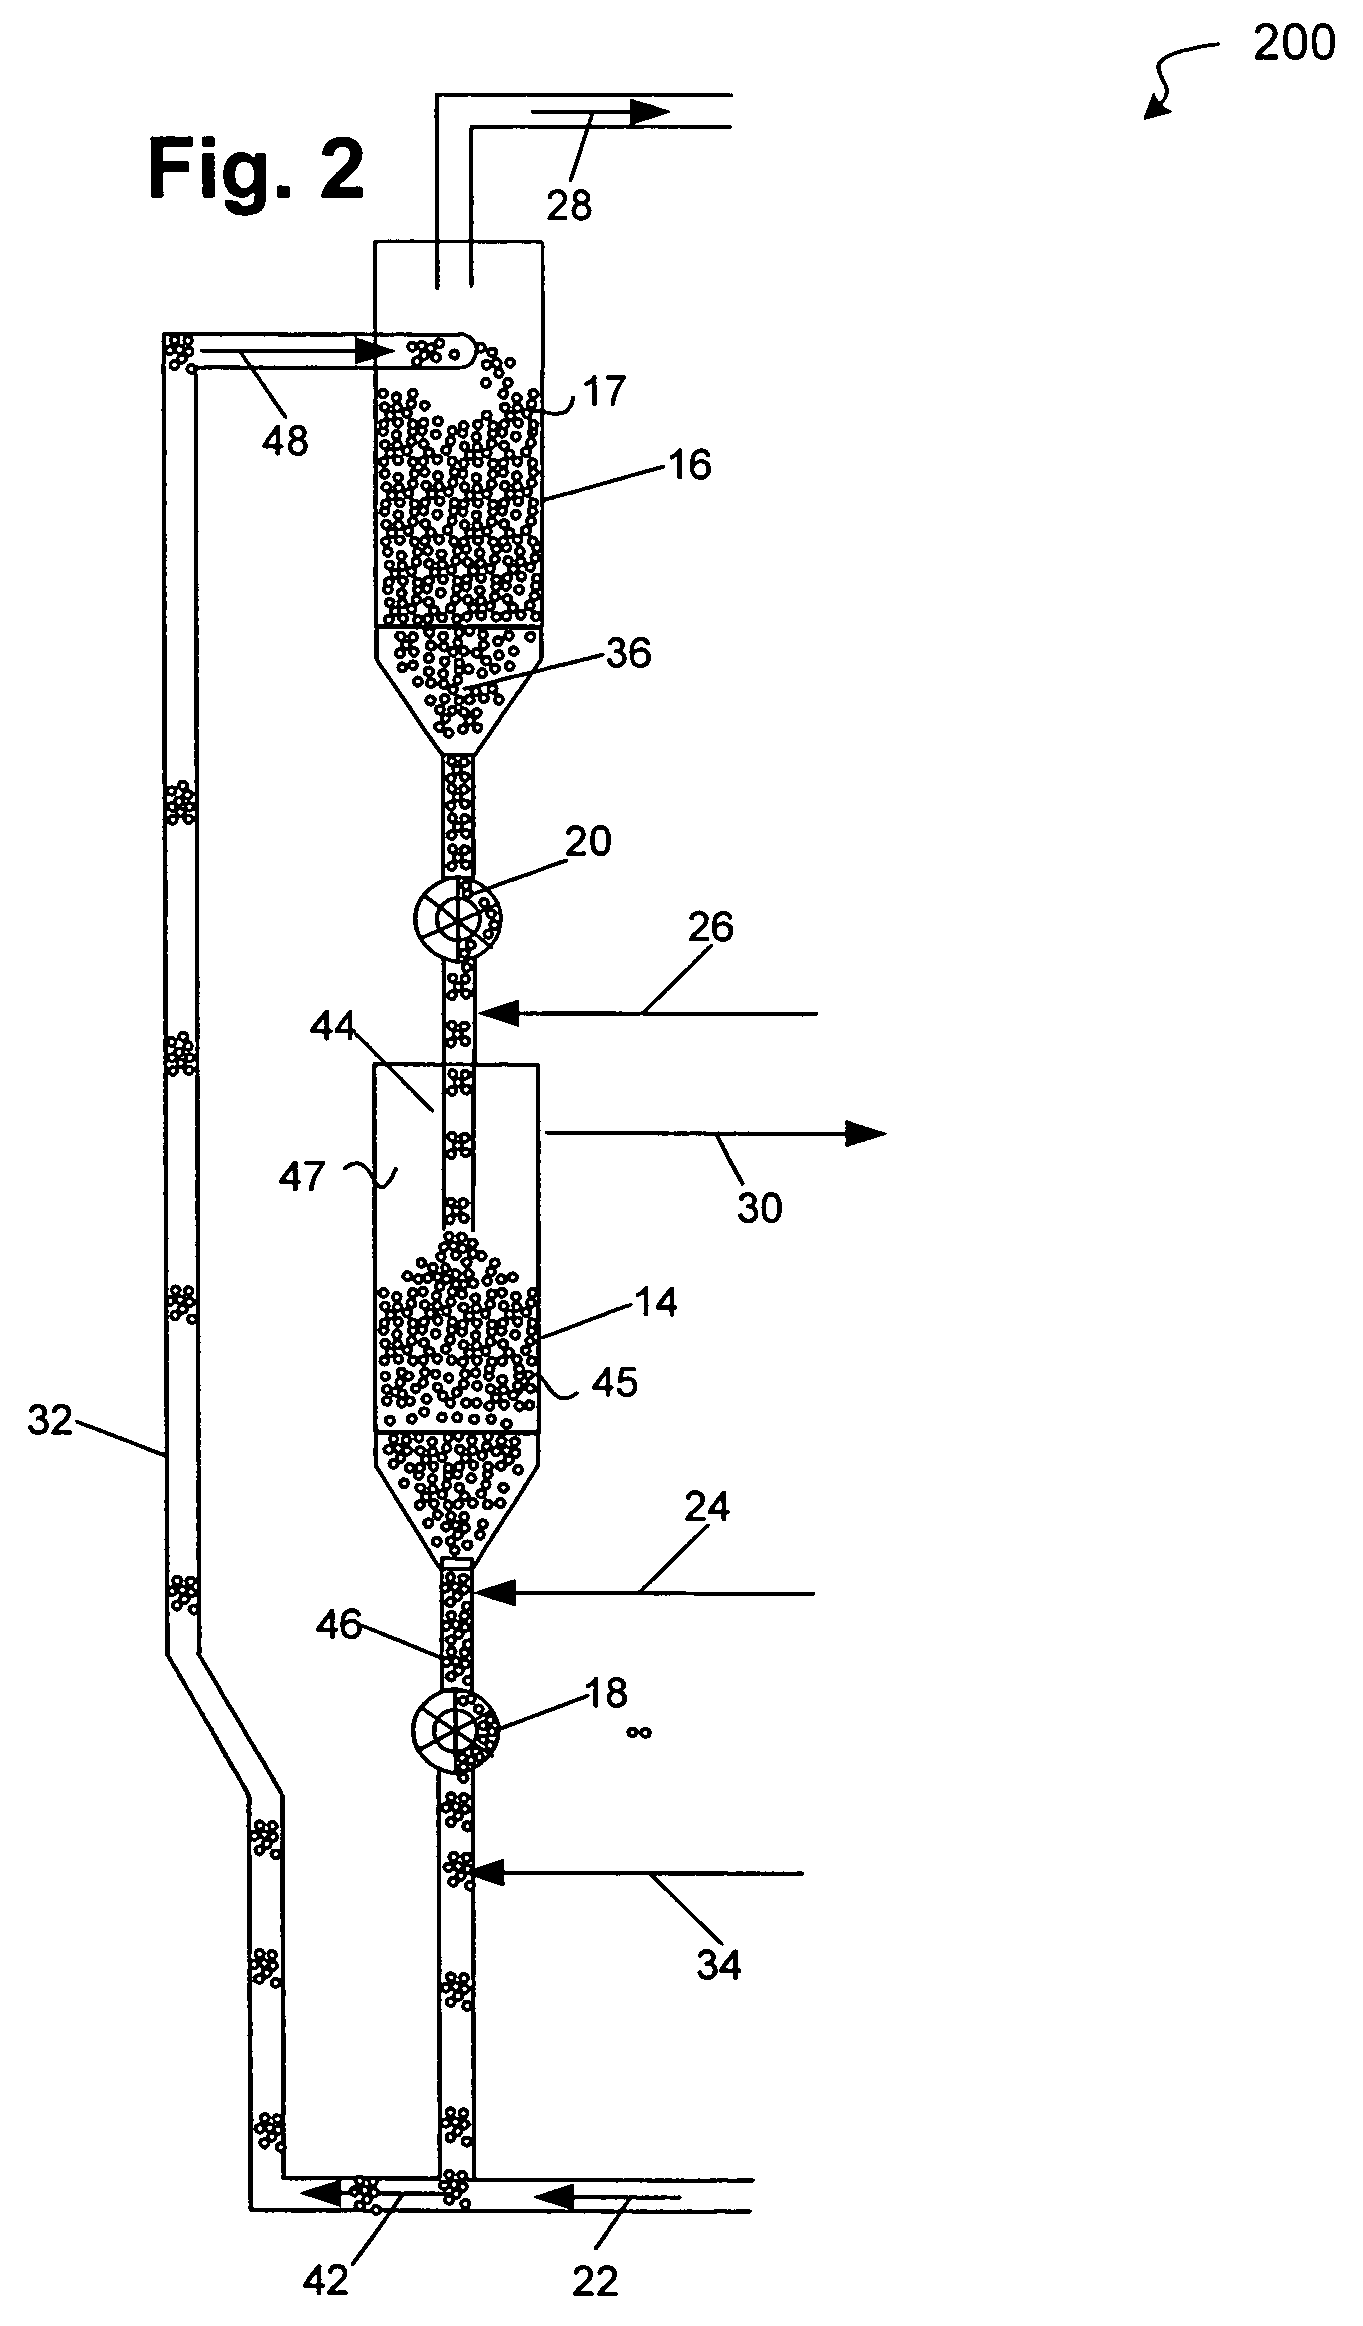 Apparatus for removing undesirable components from a contaminated solution containing both desirable and undesirable components